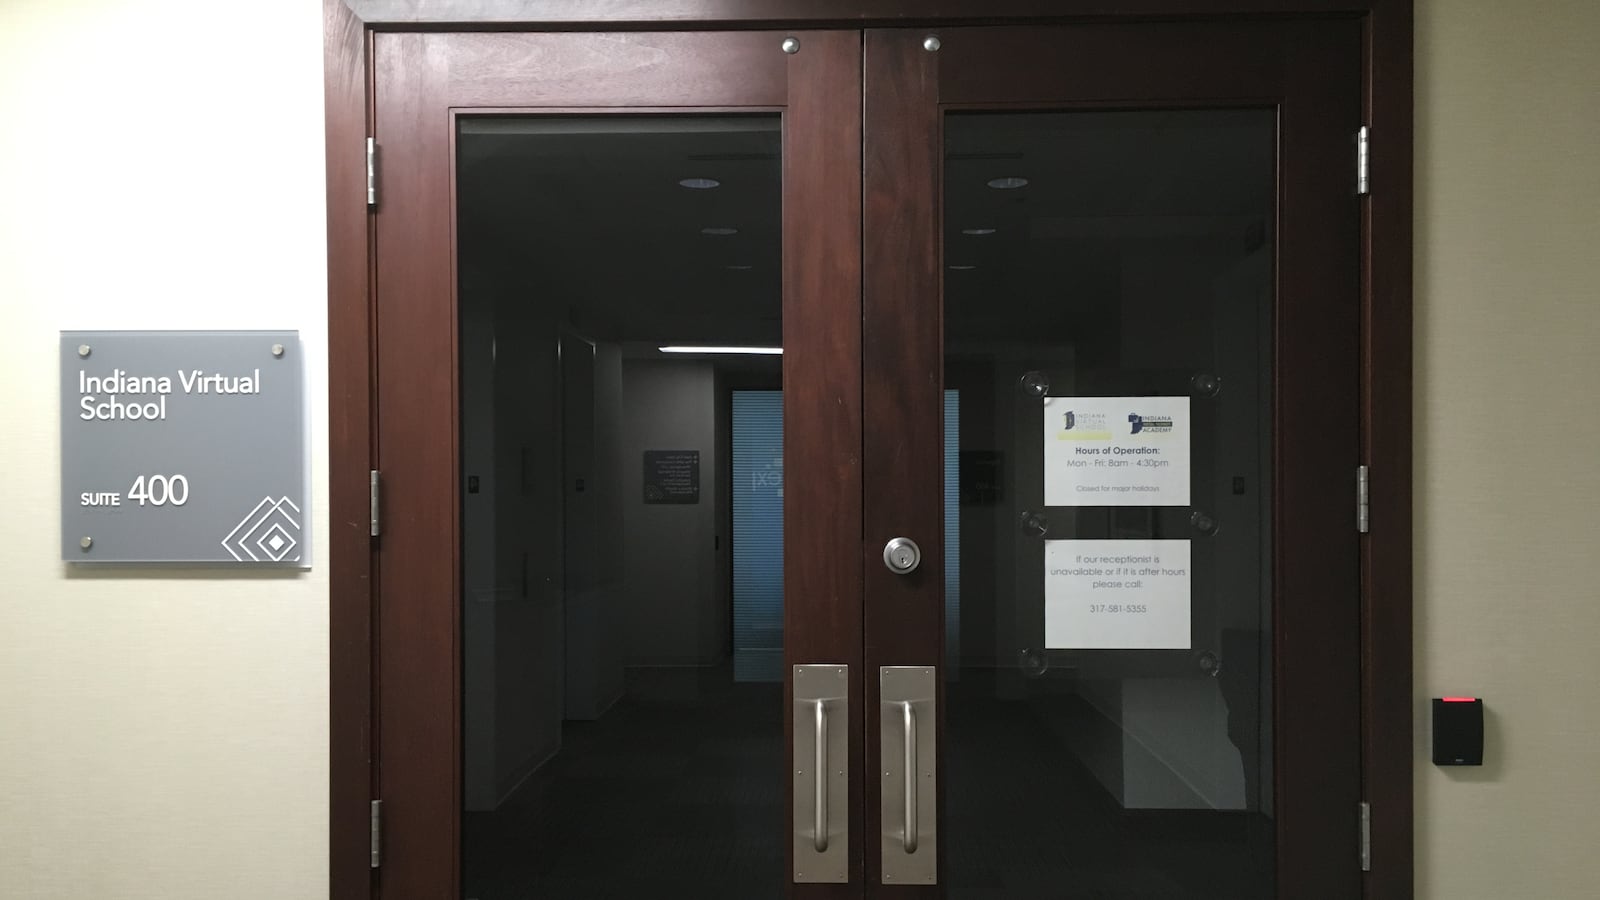 An office for Indiana Virtual School and Indiana Virtual Pathways Academy was dark and locked on a Monday morning in July during business hours.